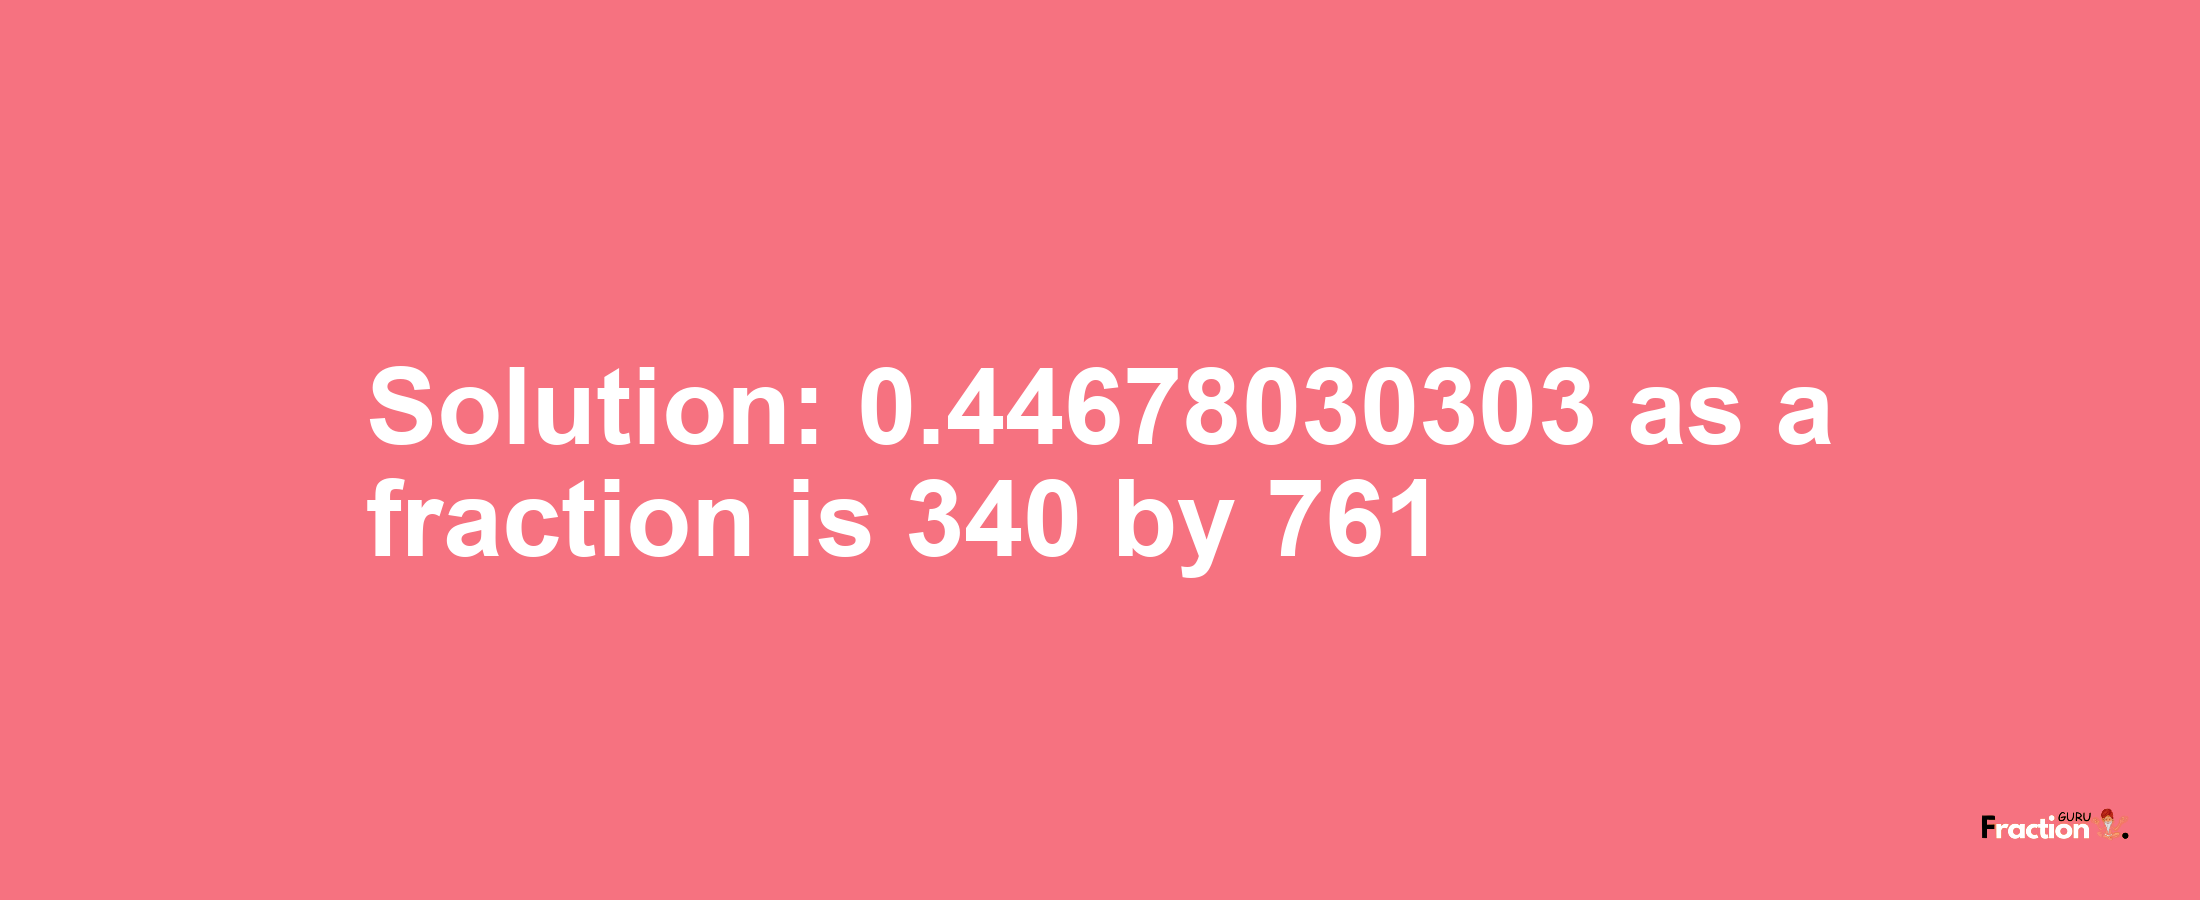 Solution:0.44678030303 as a fraction is 340/761